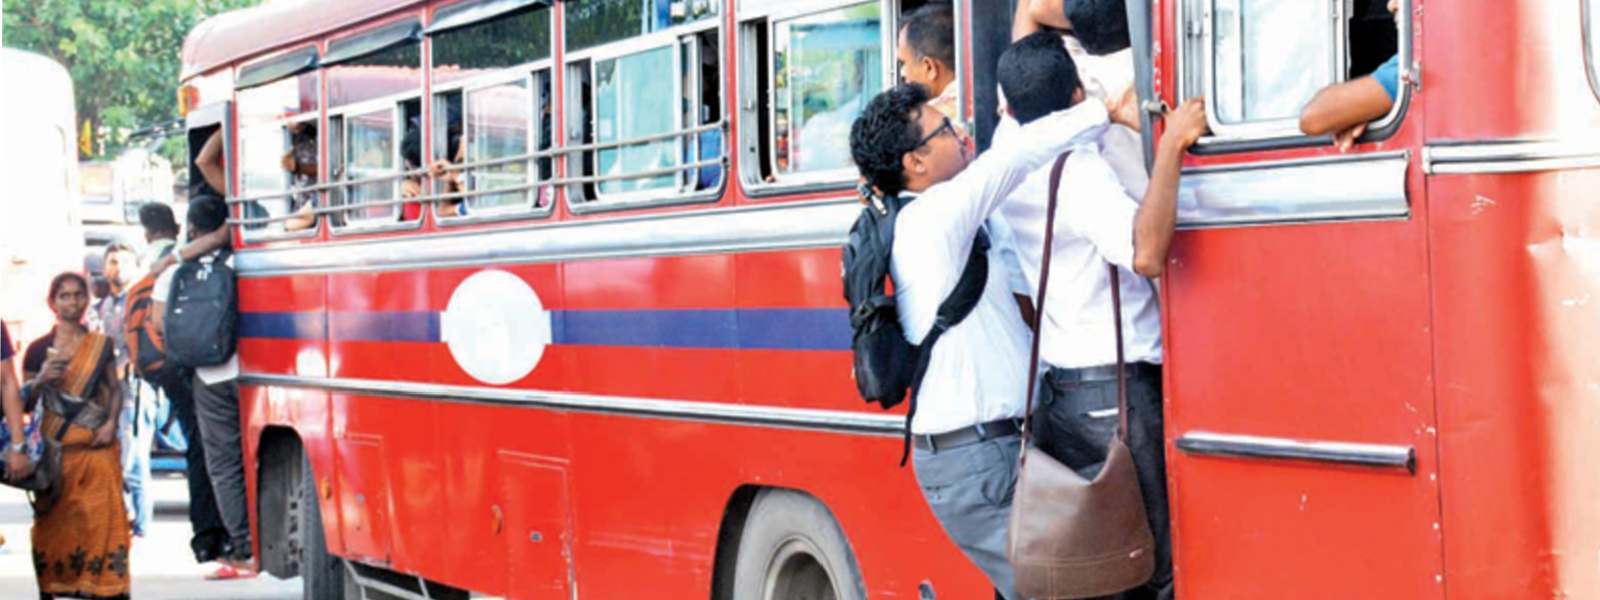 Public transport to be declared only for essential services for 2 weeks from tomorrow